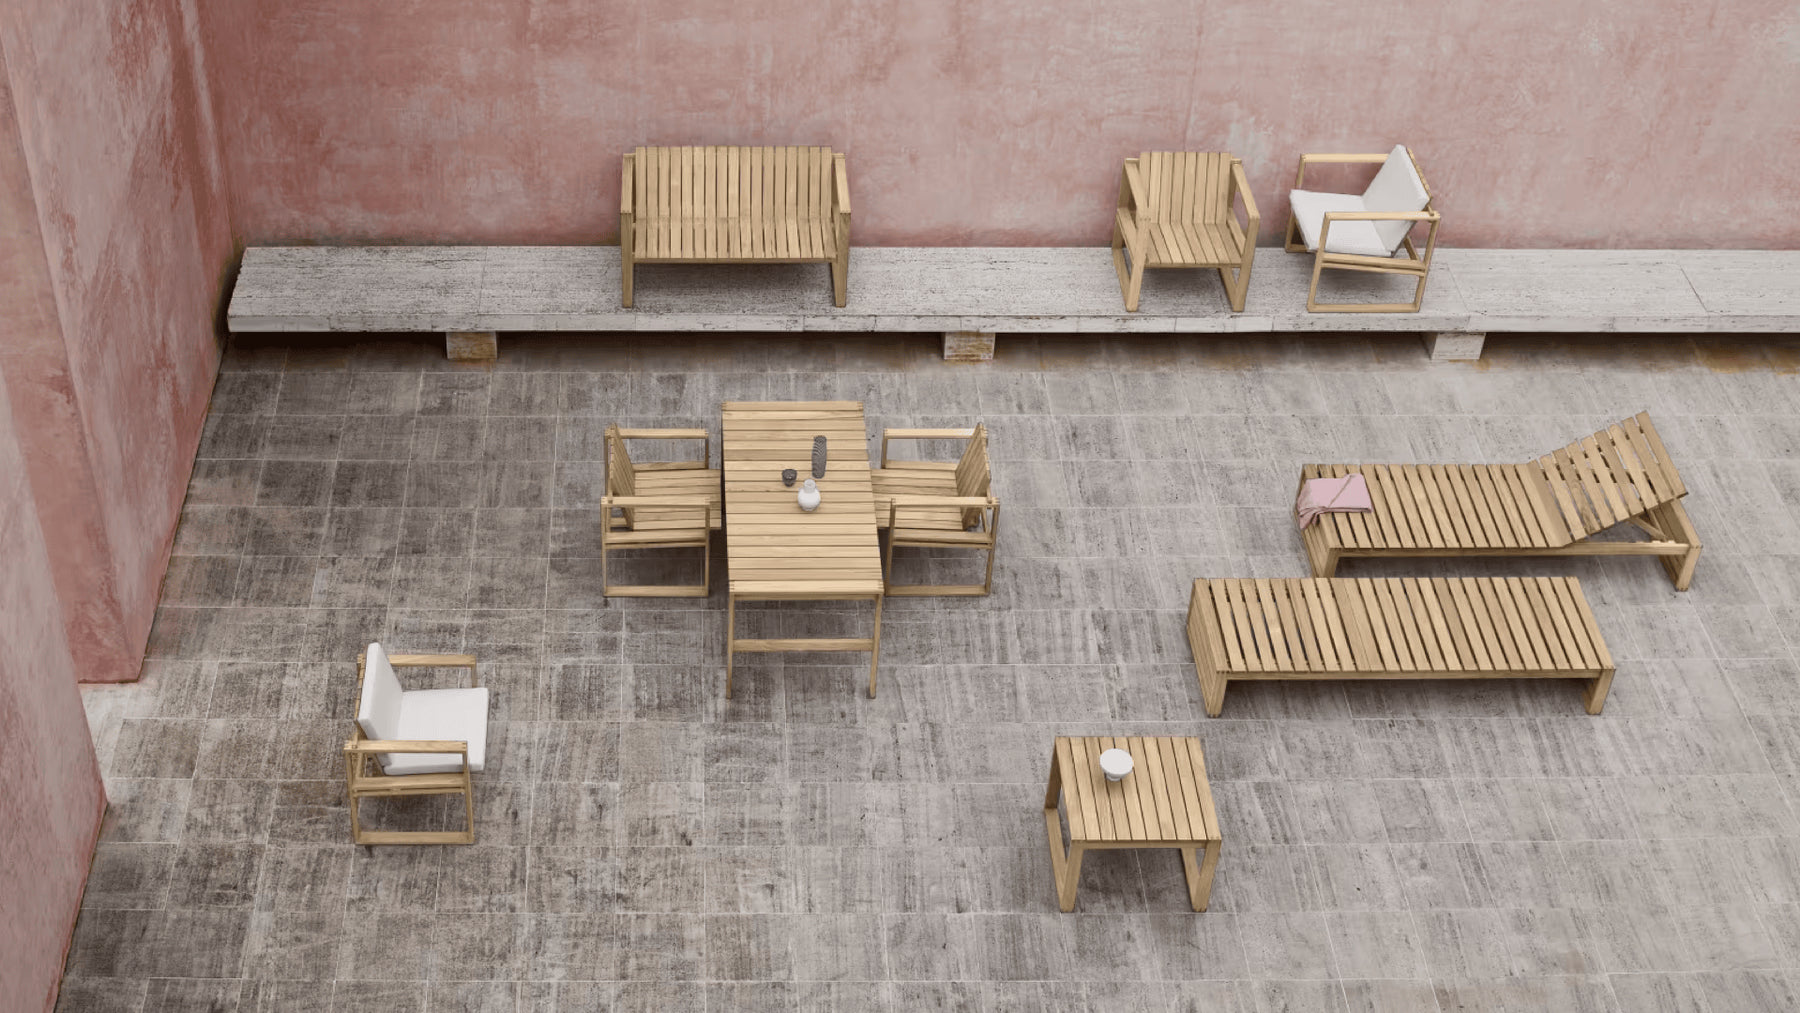 A collection of teak outdoor furniture in a stone courtyard surrounded by blush pink walls.